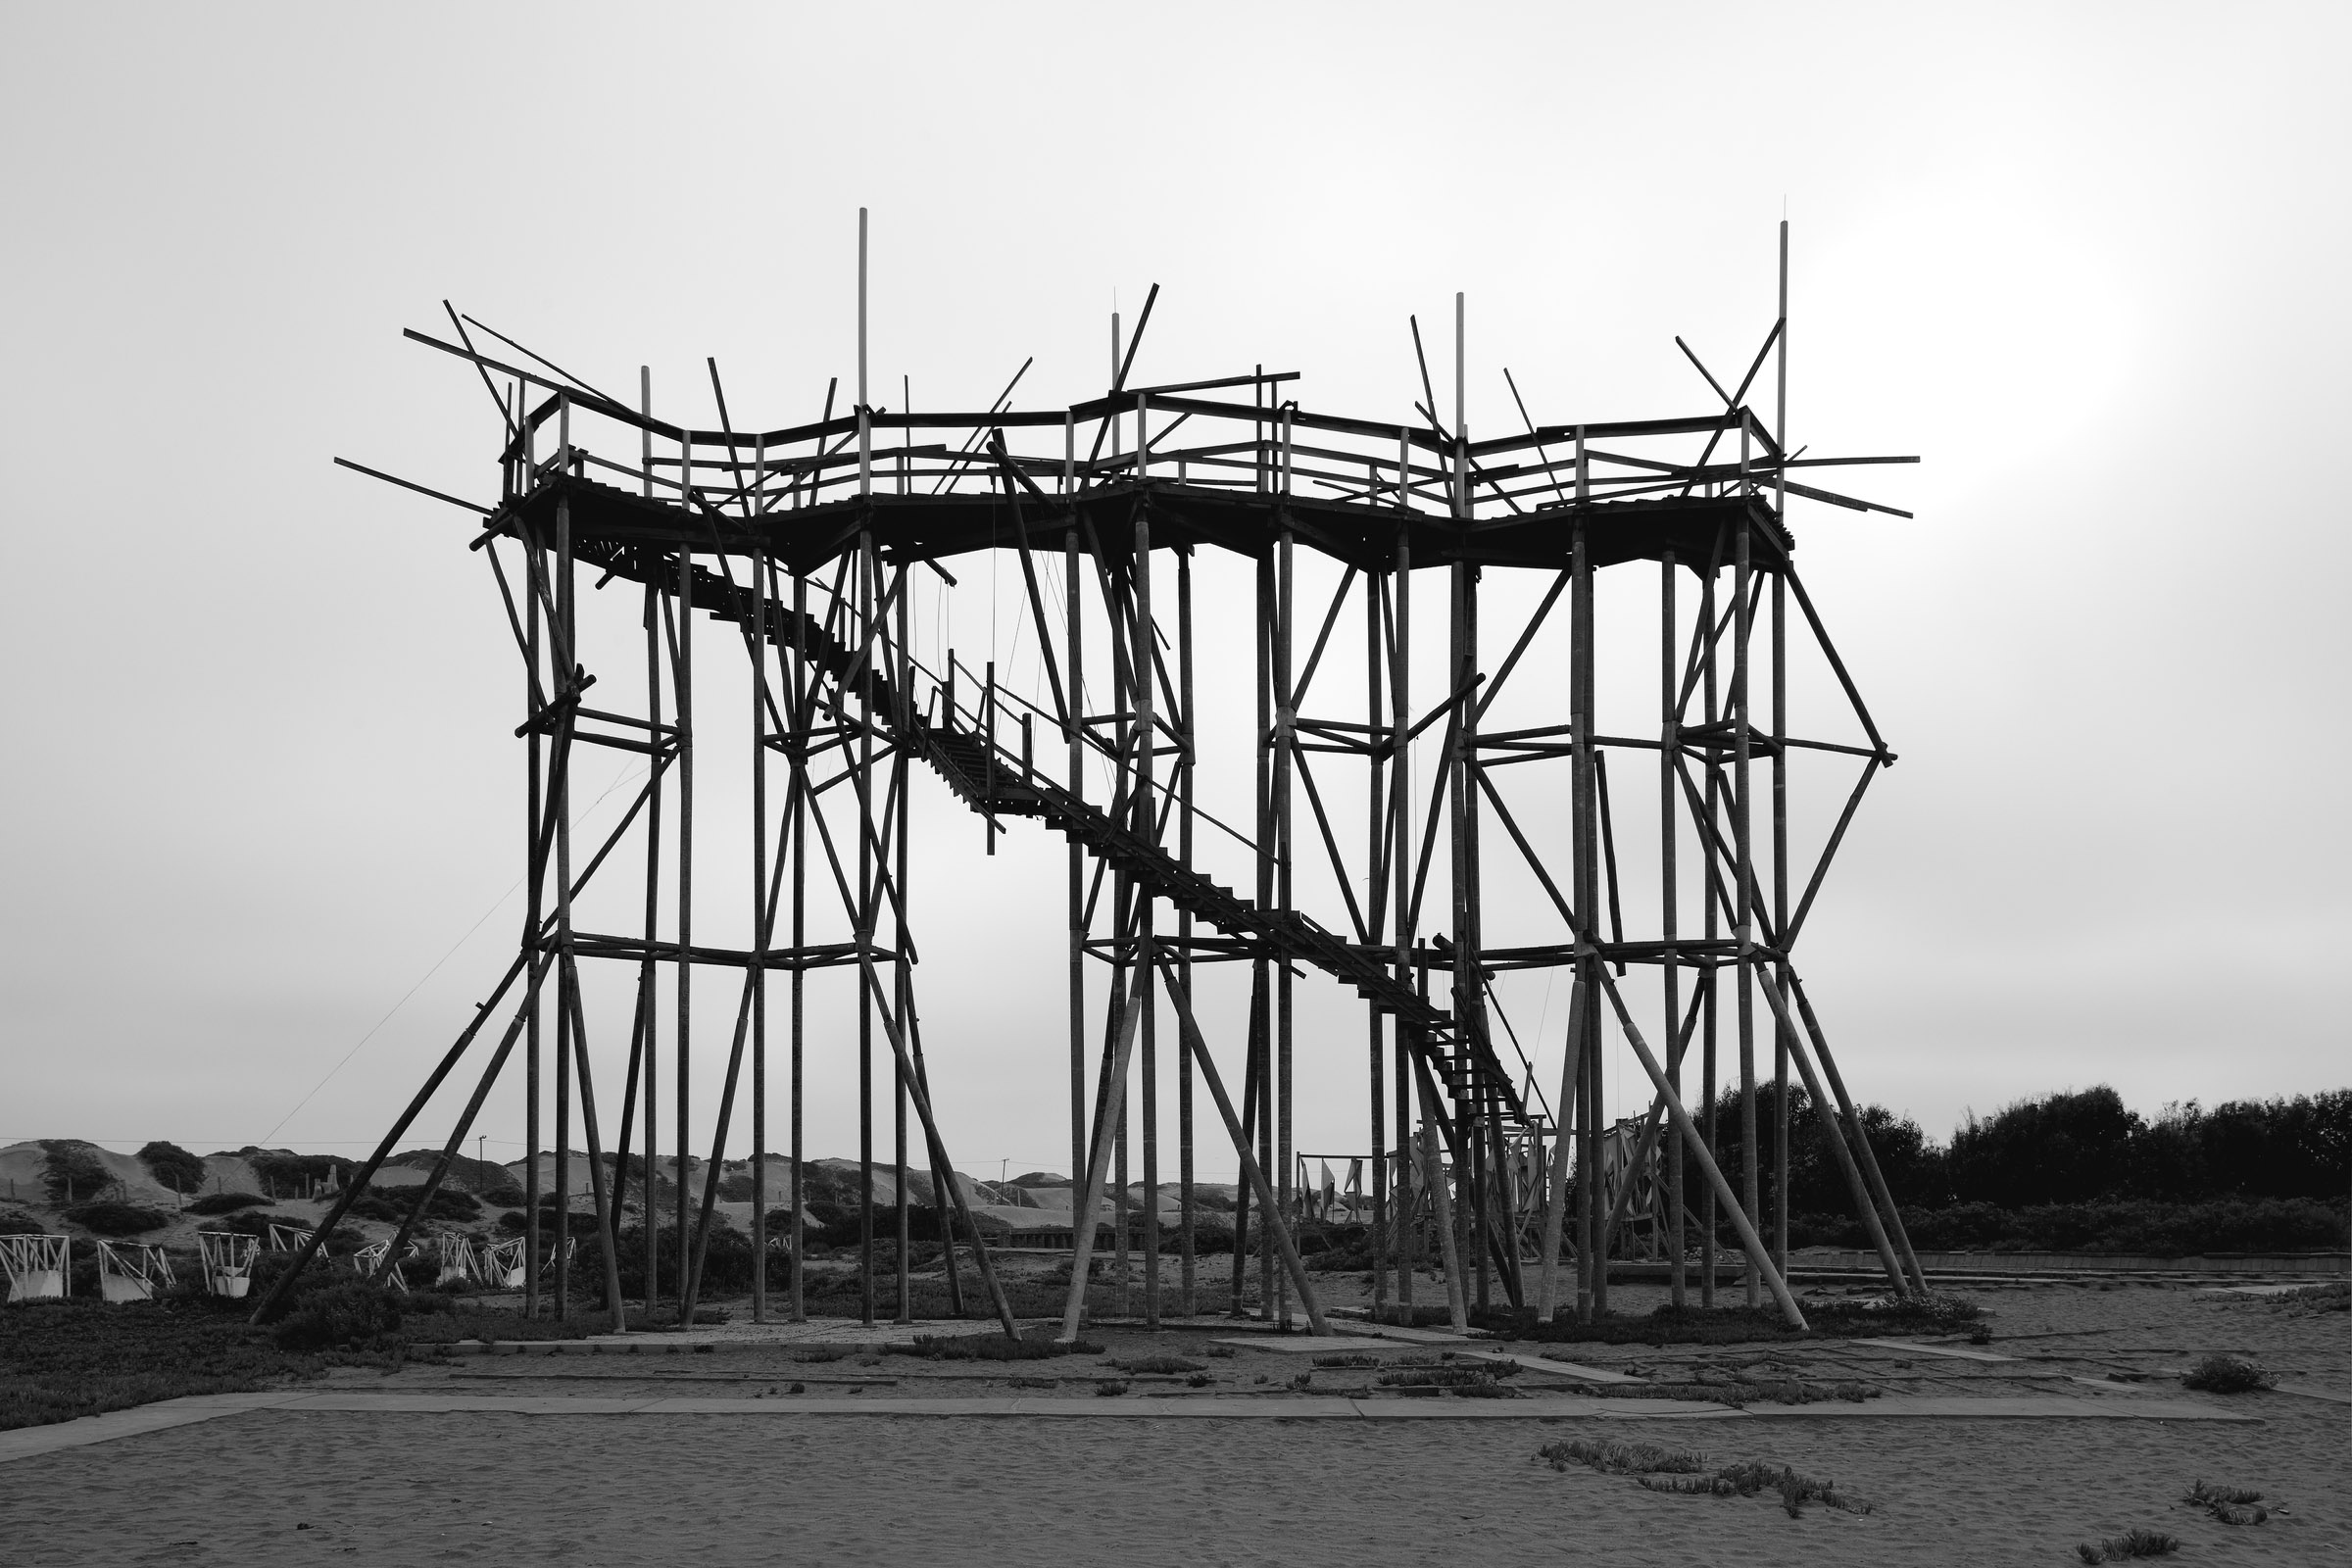 Photograph of geometric stilt structure with staircase leading up the side